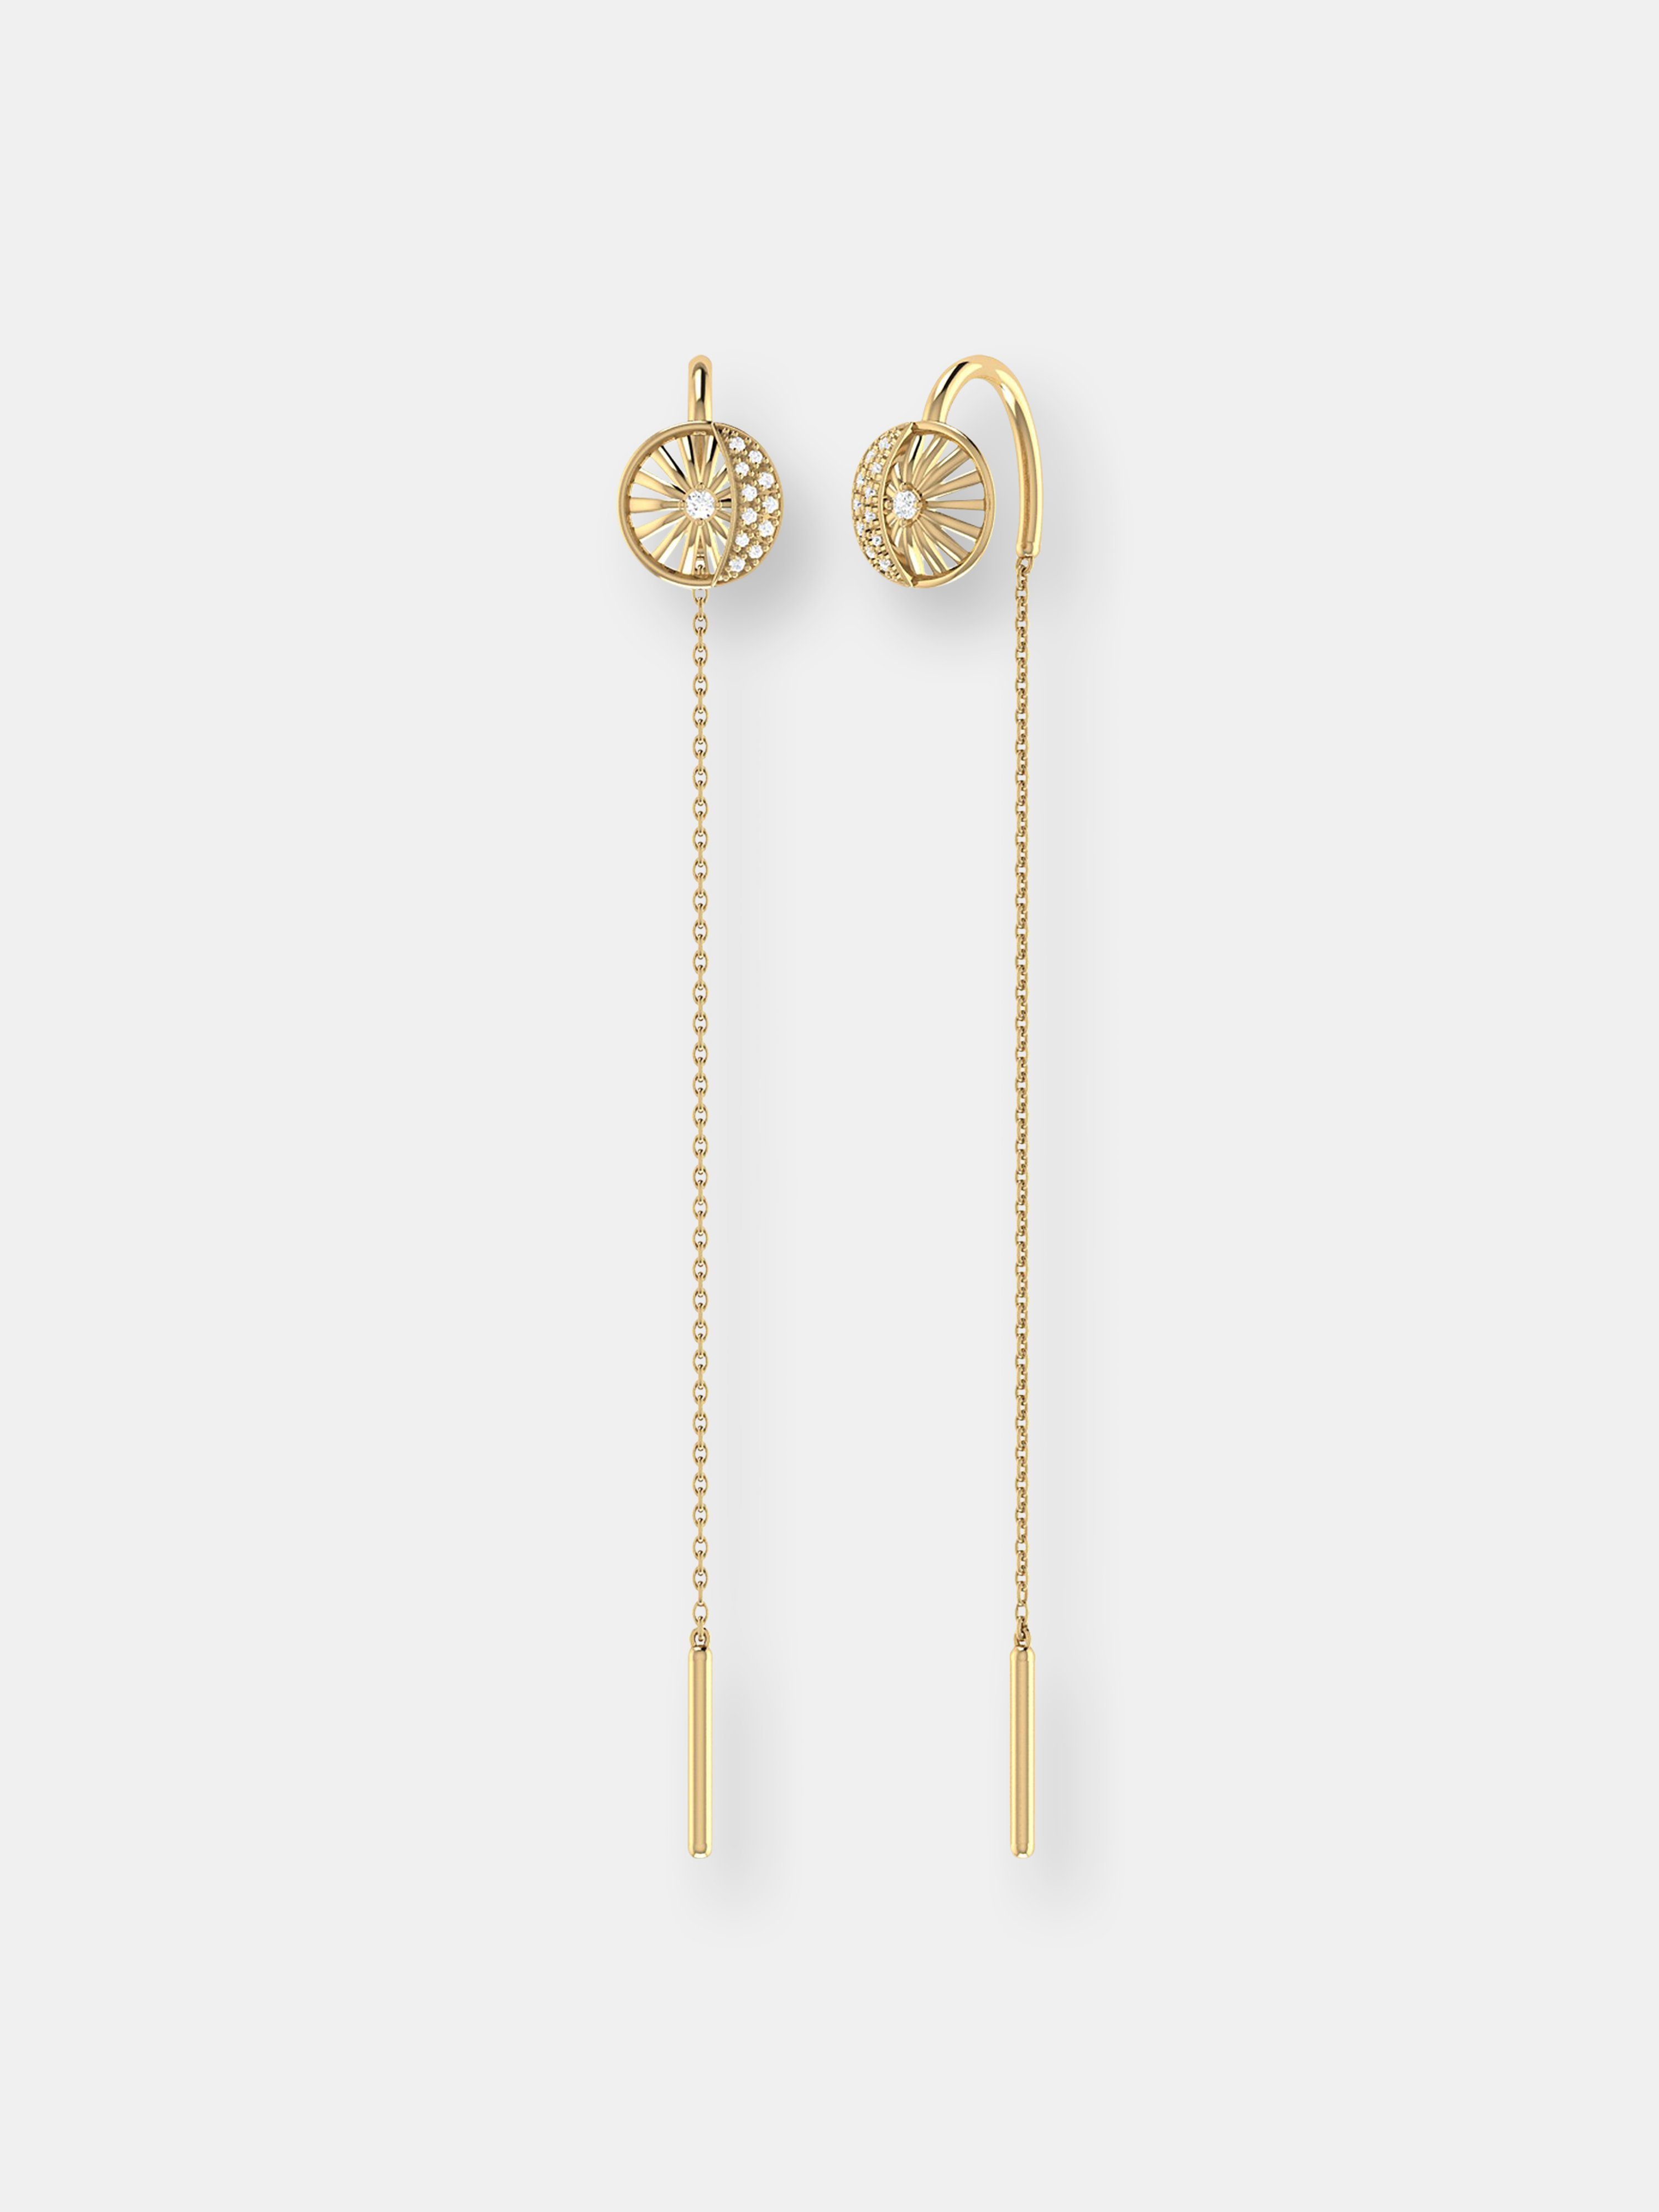 Luvmyjewelry Moon Phases Tack-in Diamond Earrings In 14k Yellow Gold Vermeil On Sterling Silver